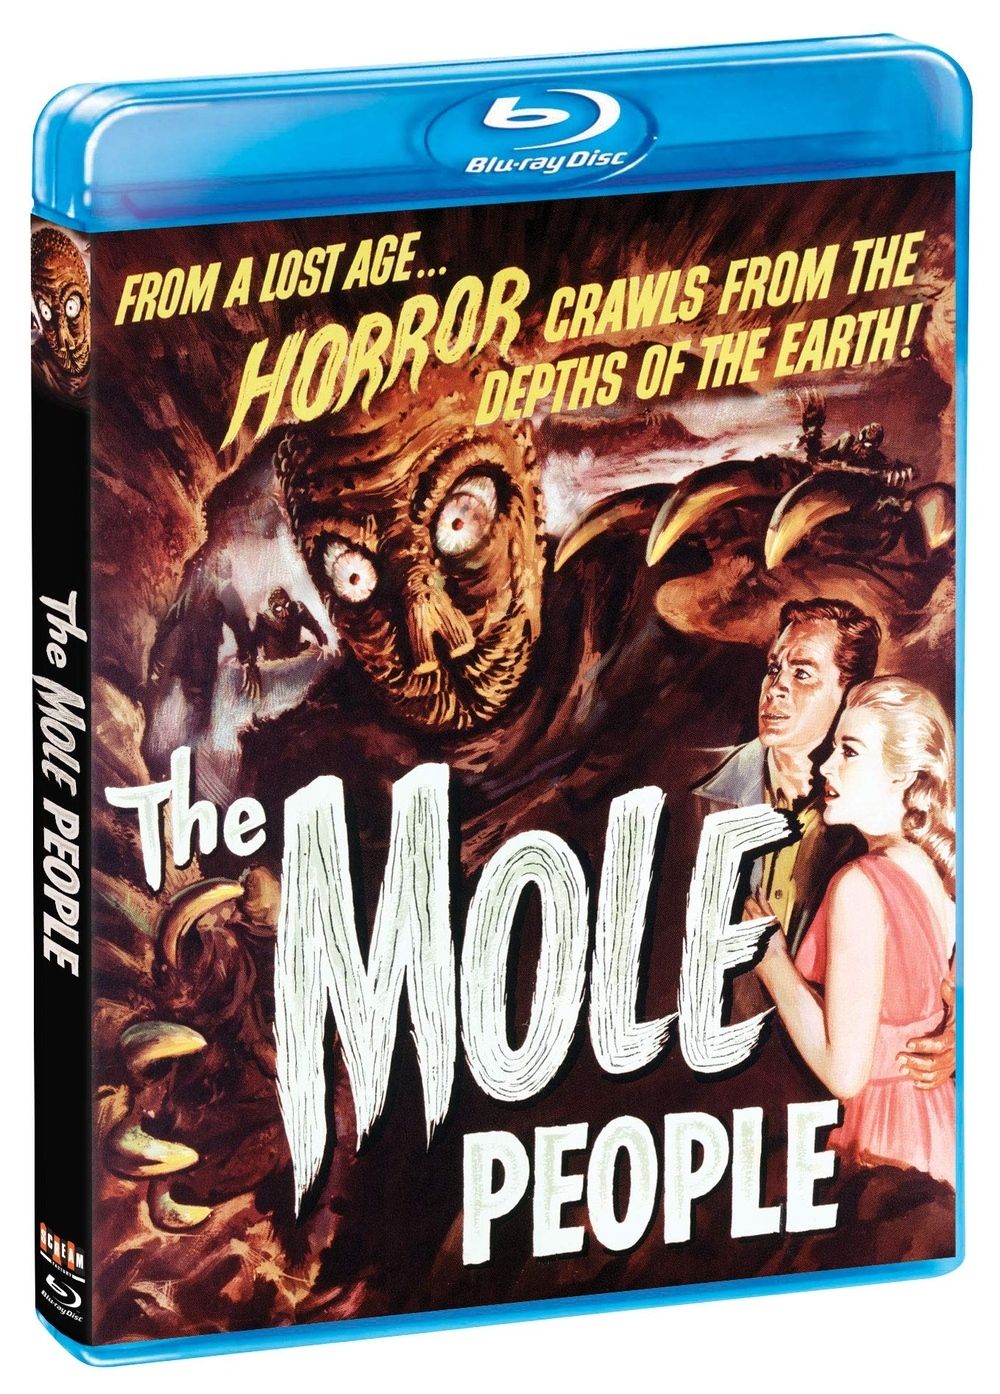 The Mole People blu-ray cover art